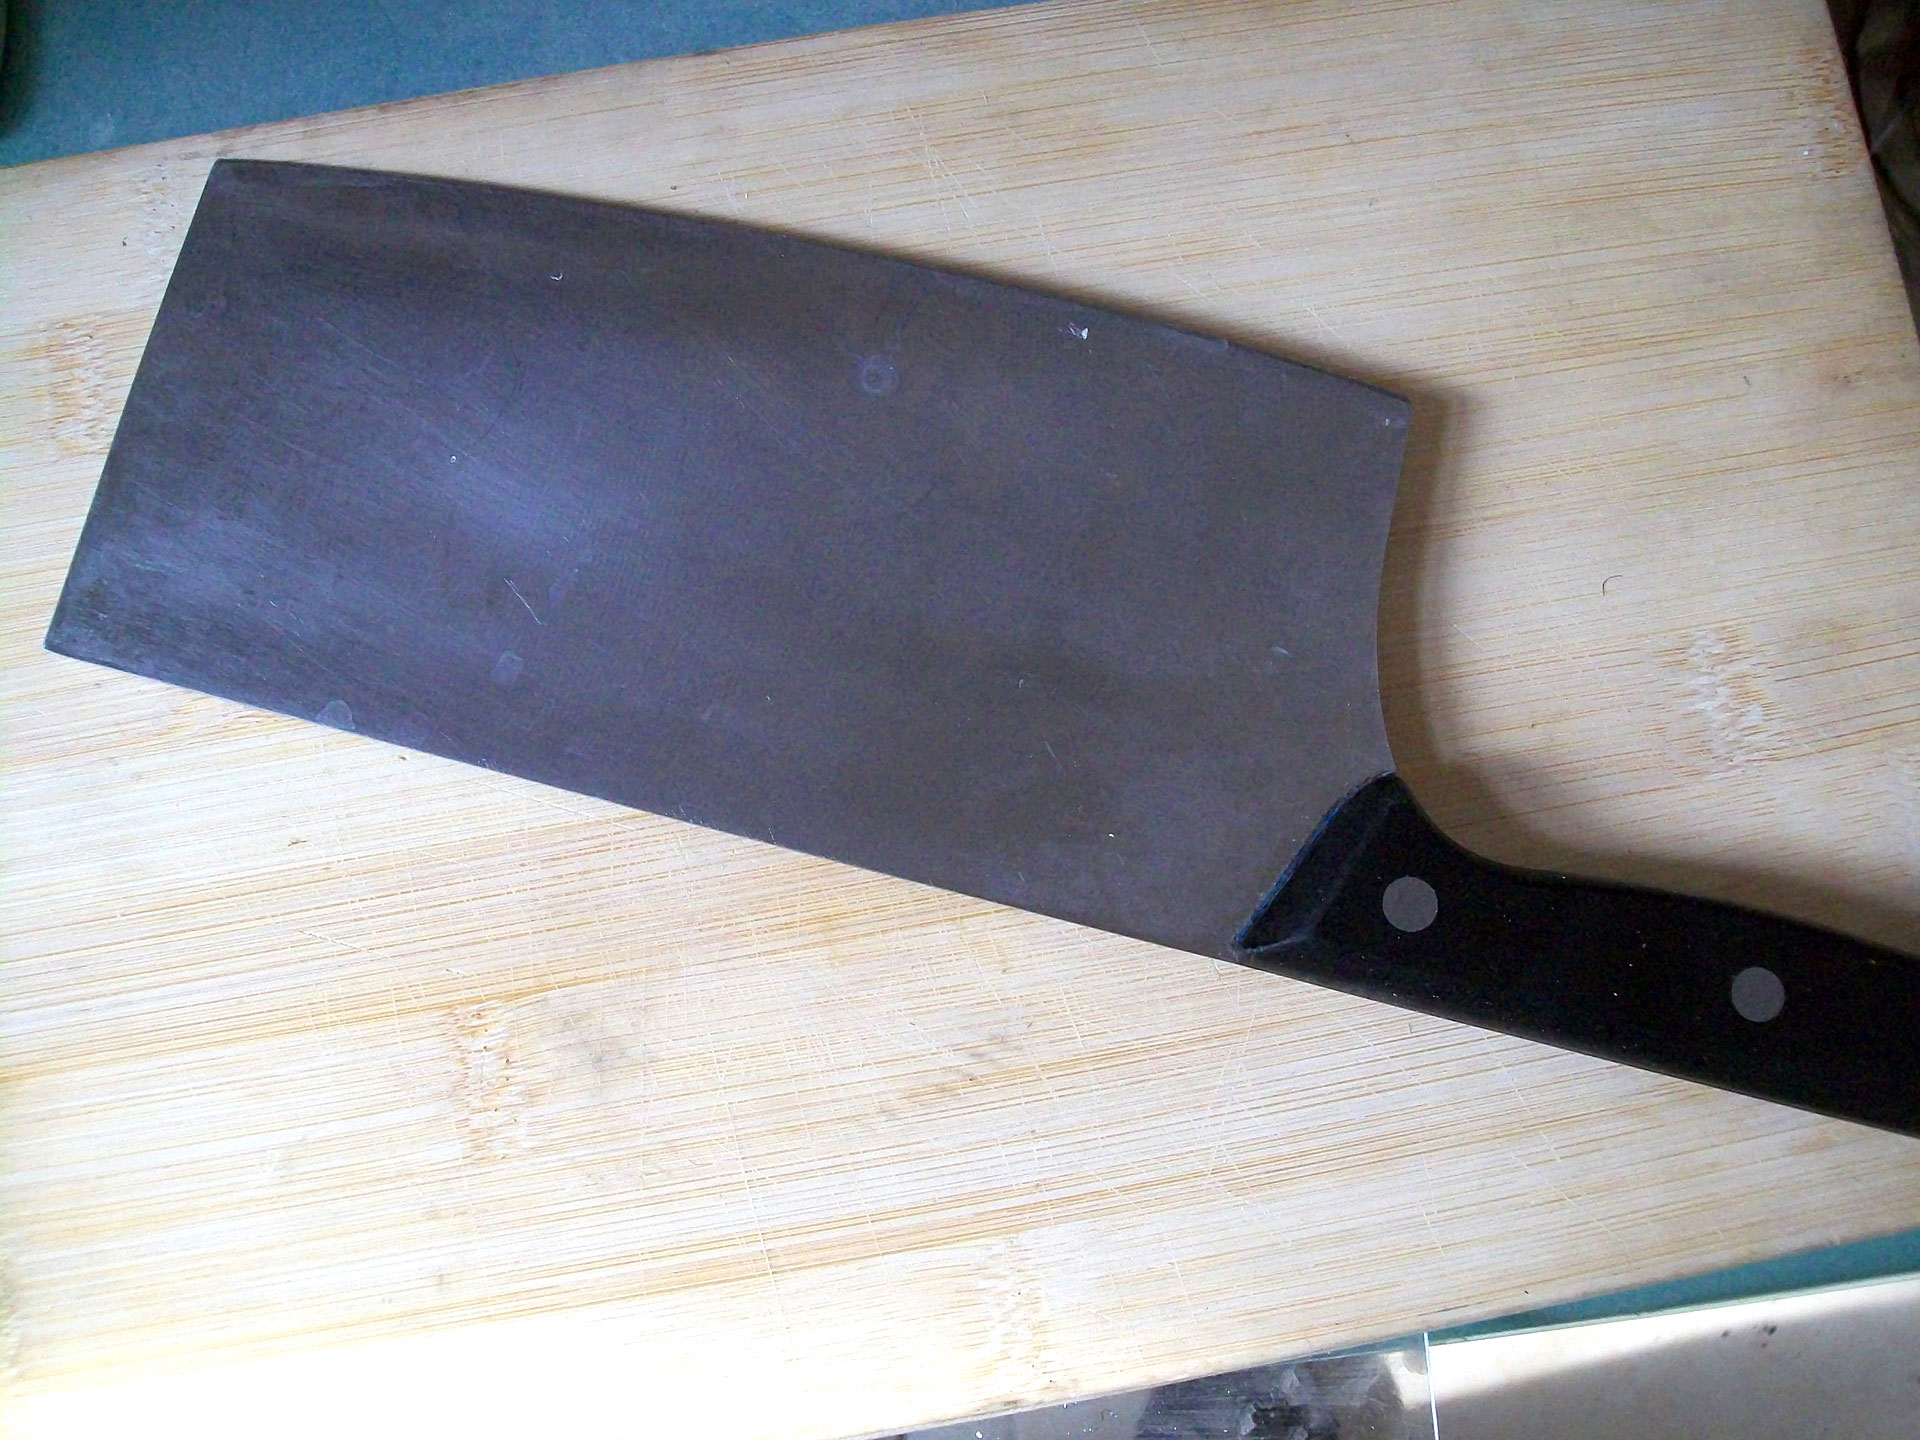 Chinese cleaver